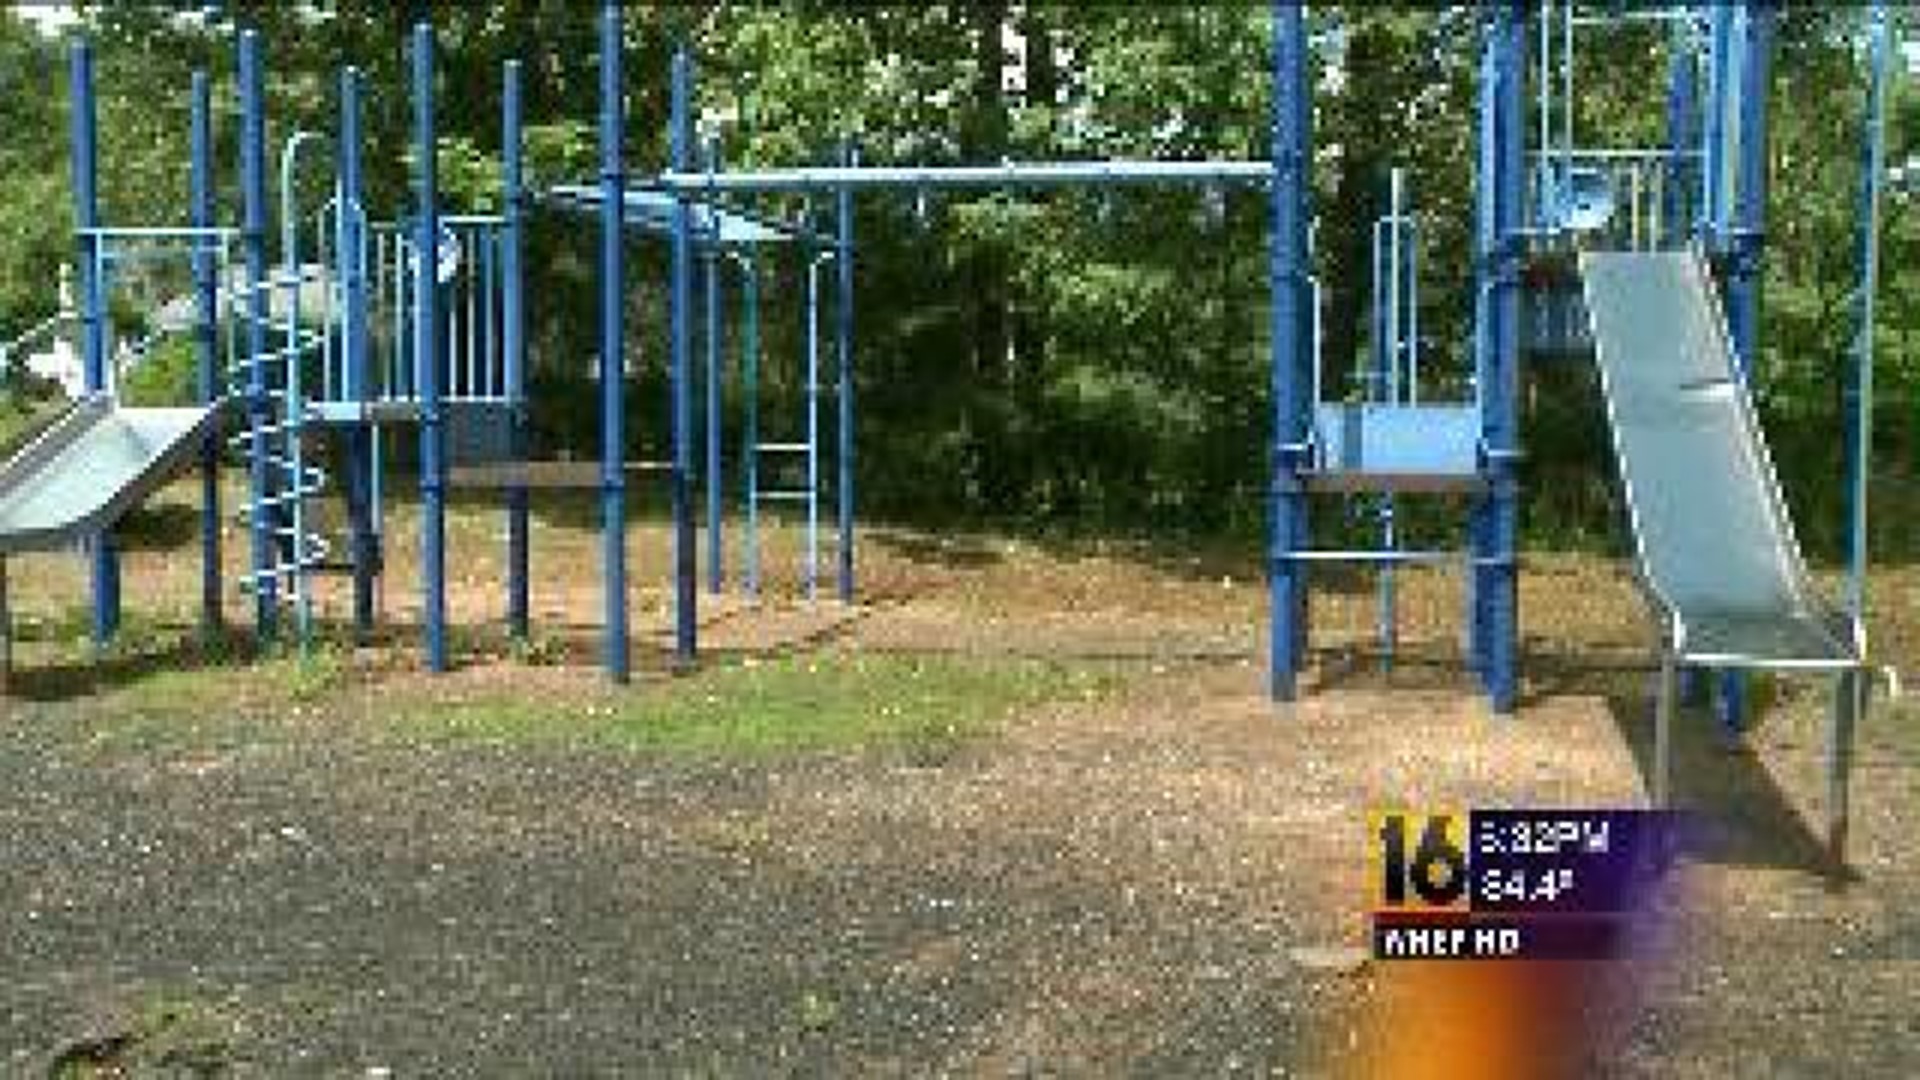 New Park Owner Speaks Out After Protest